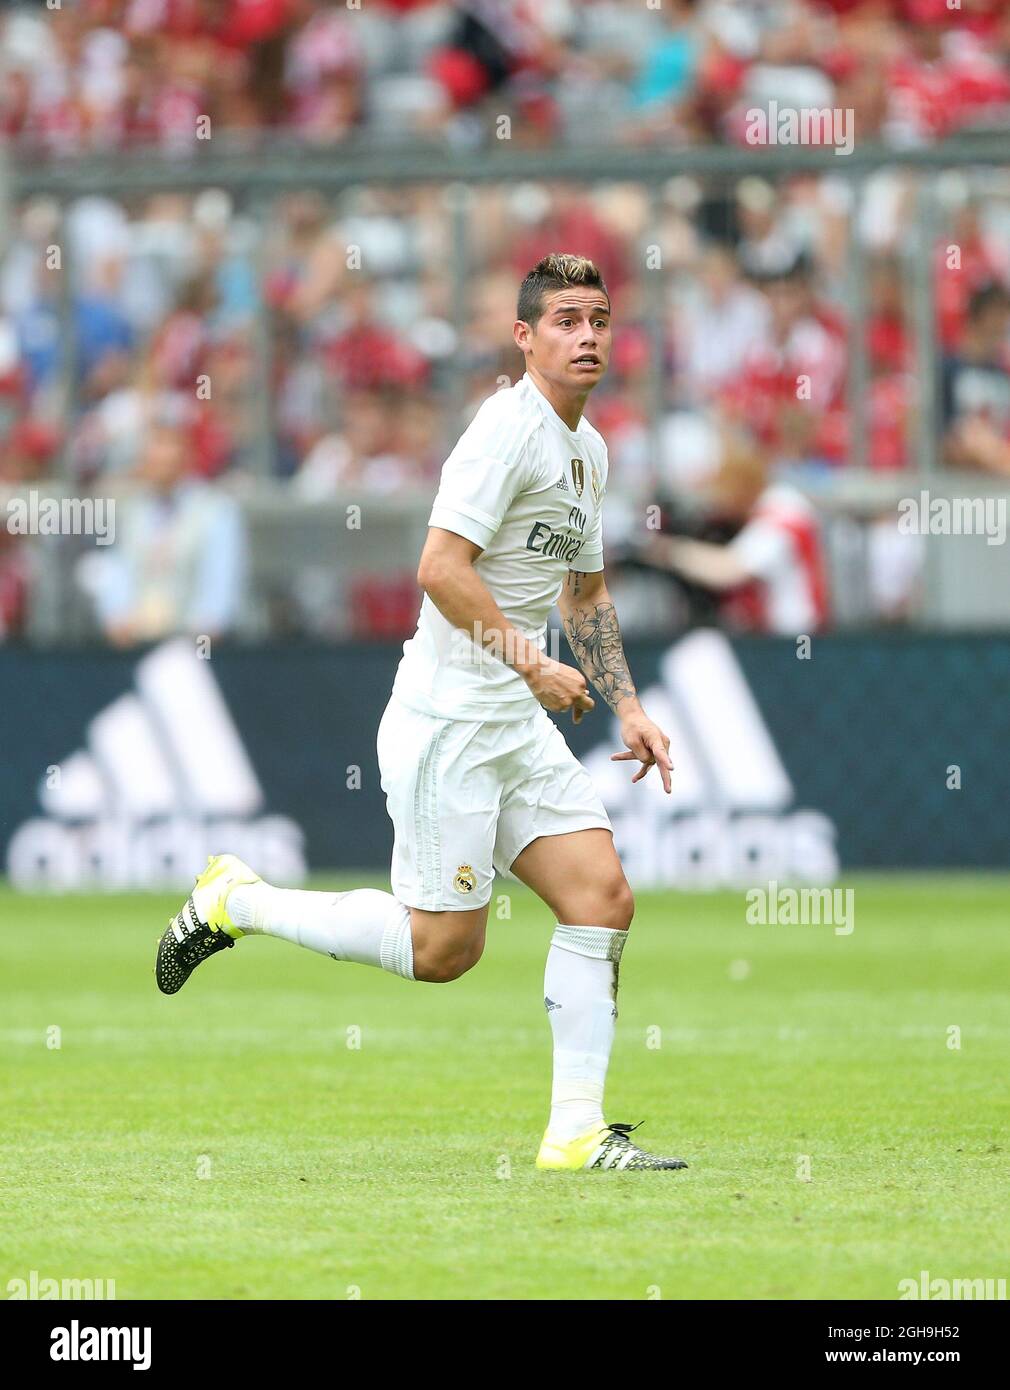 Image Aug 4 15 Munich United Kingdom Real Madrid S James Rodriguez In Action Audi Cup Real Madrid Vs Tottenham Hotspur Allianz Arena Munich Germany 4th August 15 Stock Photo Alamy